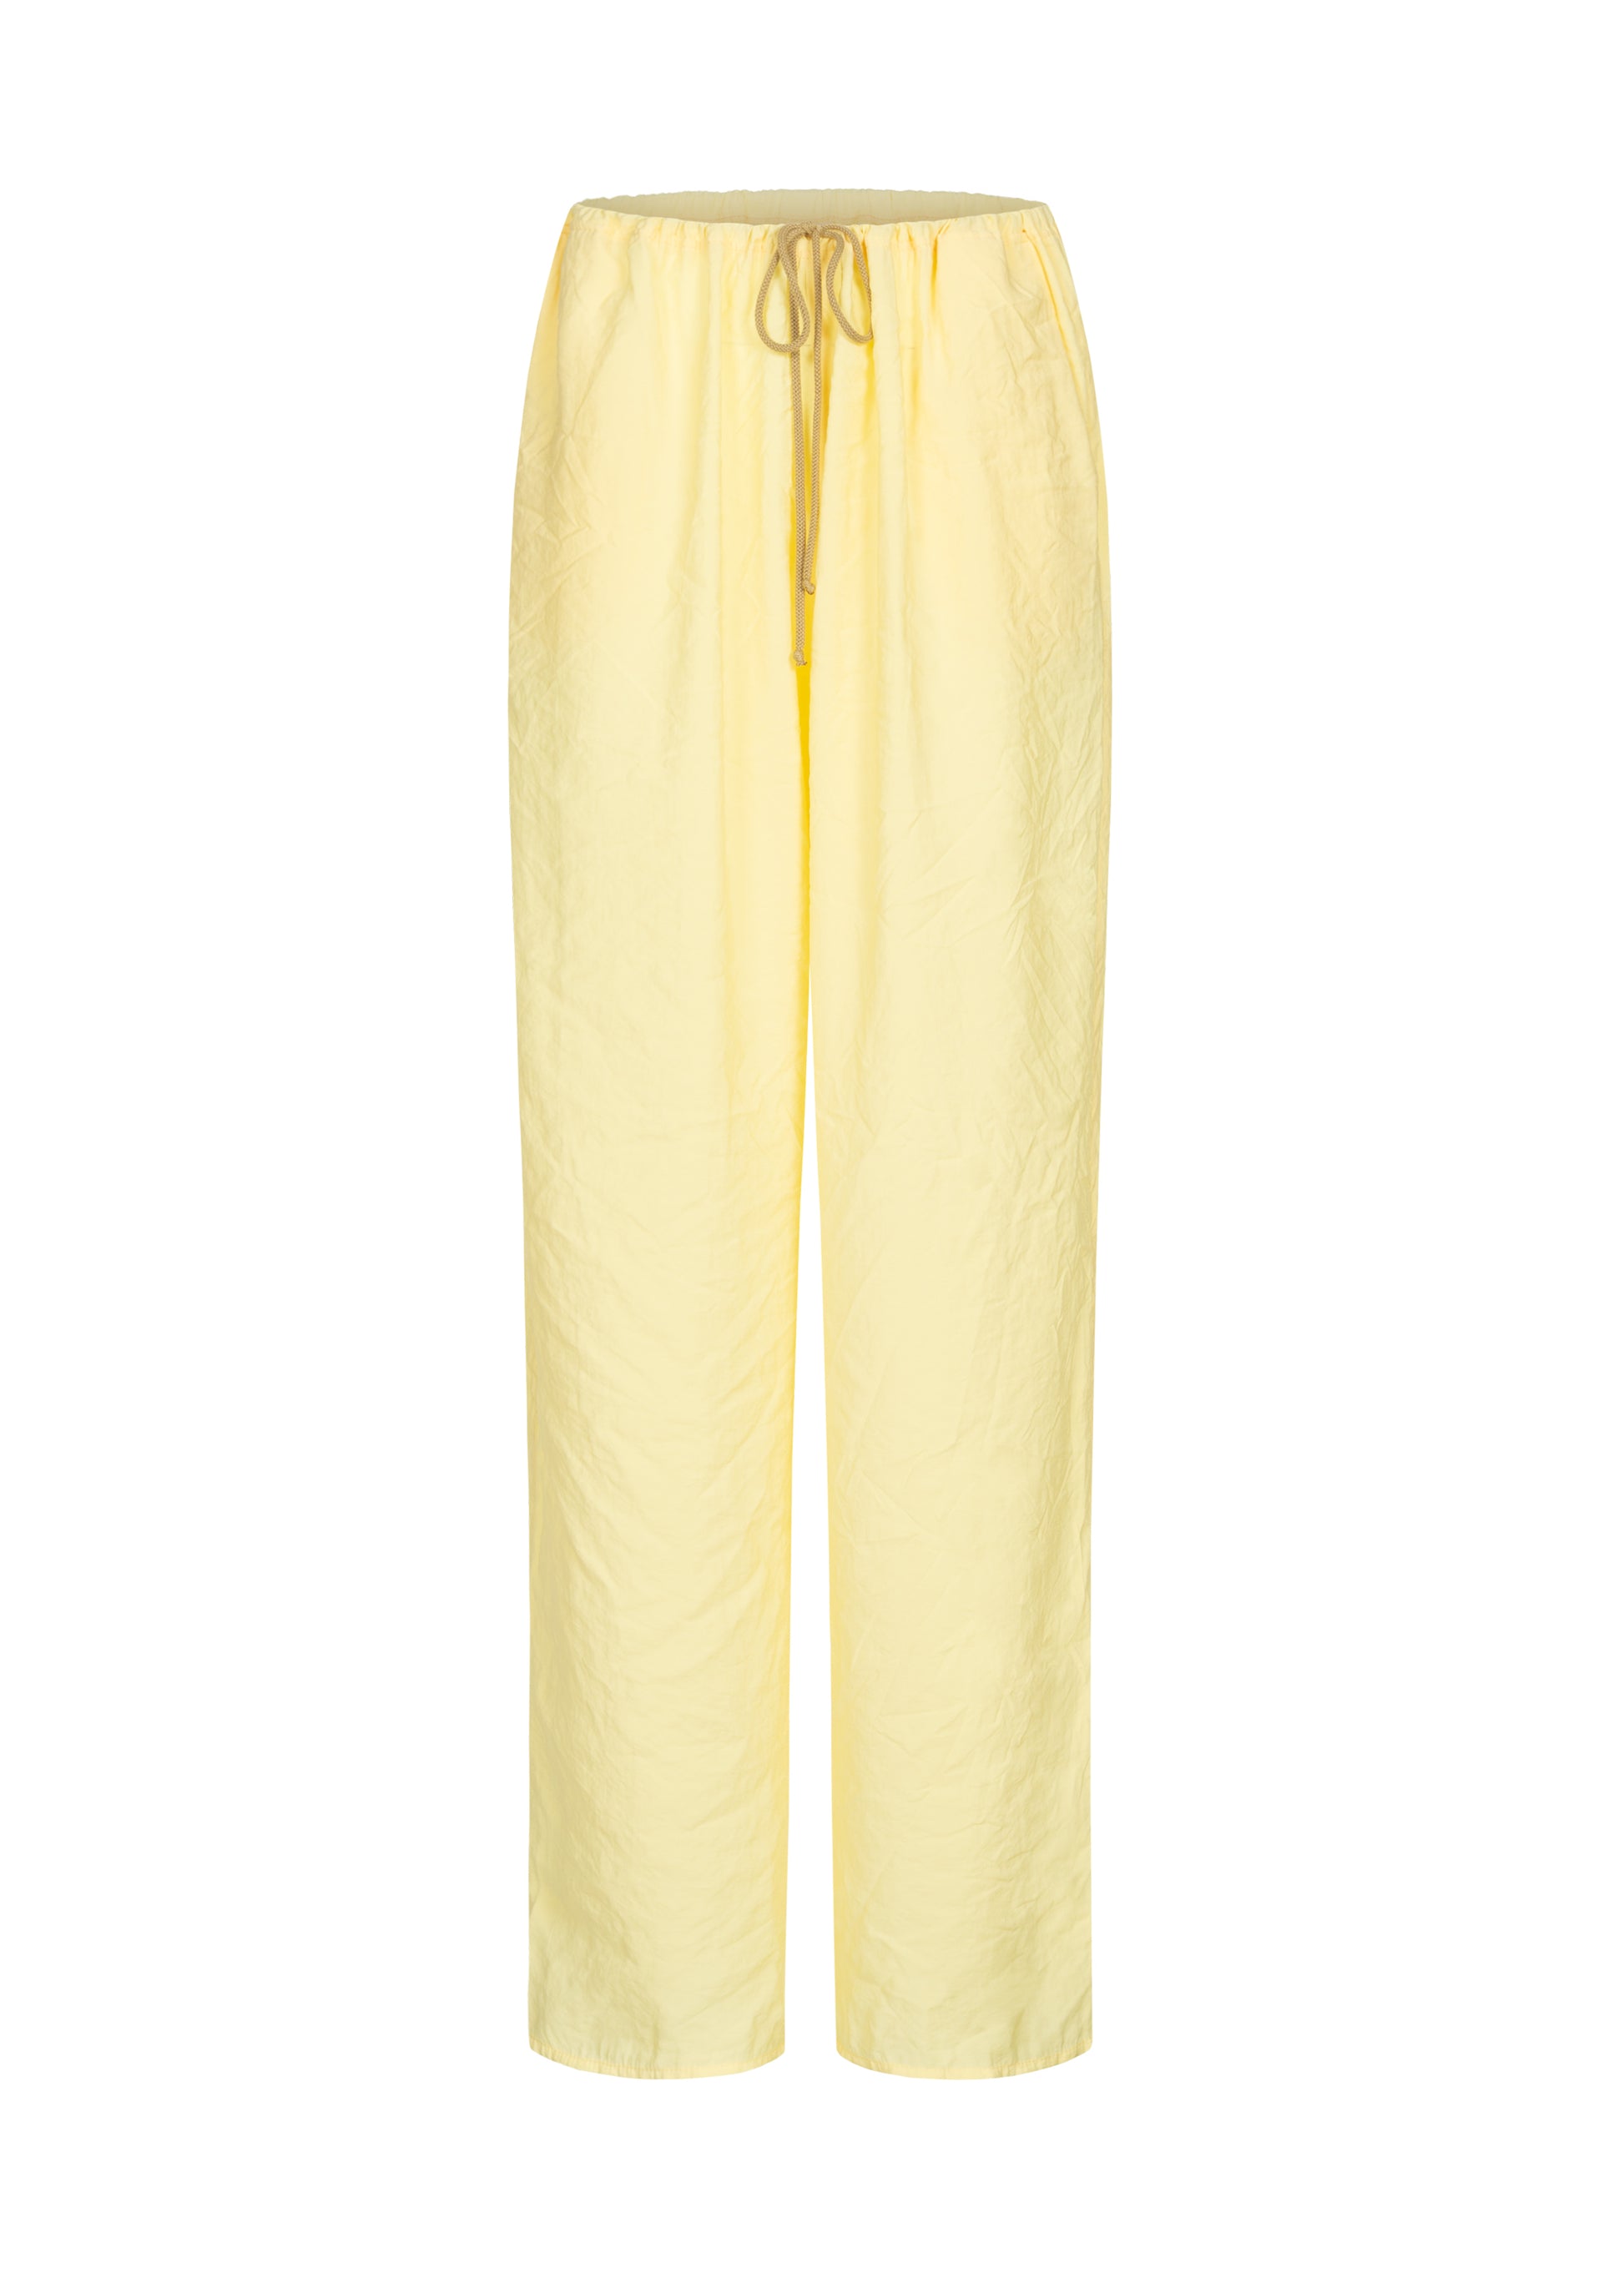 Viscose blend trousers featuring a drawstring fastening waist, side pockets and a long length from FORMA brand